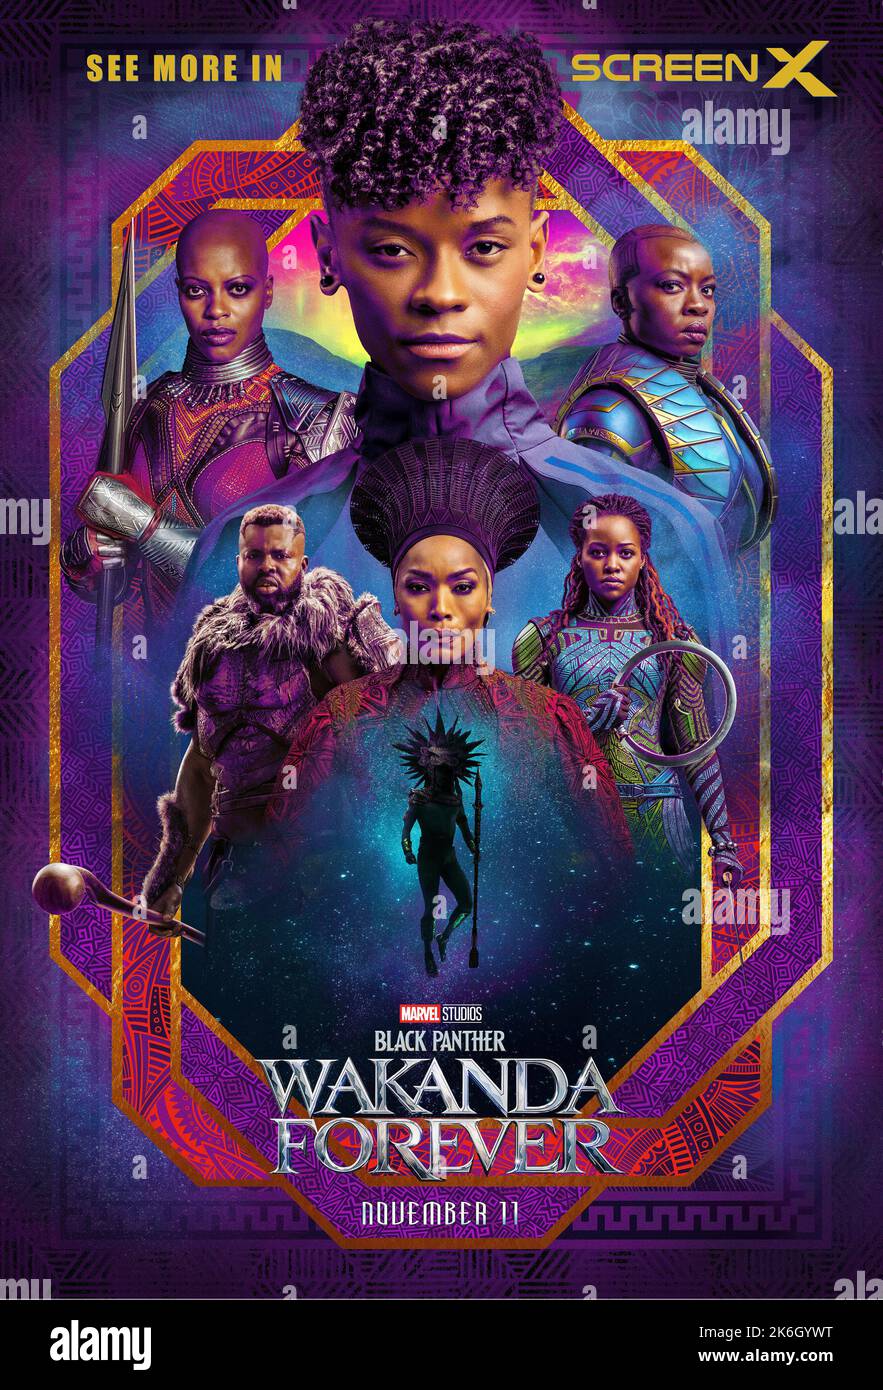 Black Panther Wakanda Forever  Black Panther Wakanda Forever Movie Poster  Director - Ryan Coogler  November 2022  FP Black Panther Wakanda Forever 02   FlixPix/Marvel Studios.  For editorial use only.  Copyright of Marvel Studios. and/or the Photographer assigned by the Movie or Production Company.  A Mandatory Credit To the movie company is required.  Strictly for use for the promotion of the above film unless written authority gained via the movie company is obtained by the end-user.  FlixPix is NOT the copyright owner & acts solely as a service of supply to recognised media outlets. Stock Photo